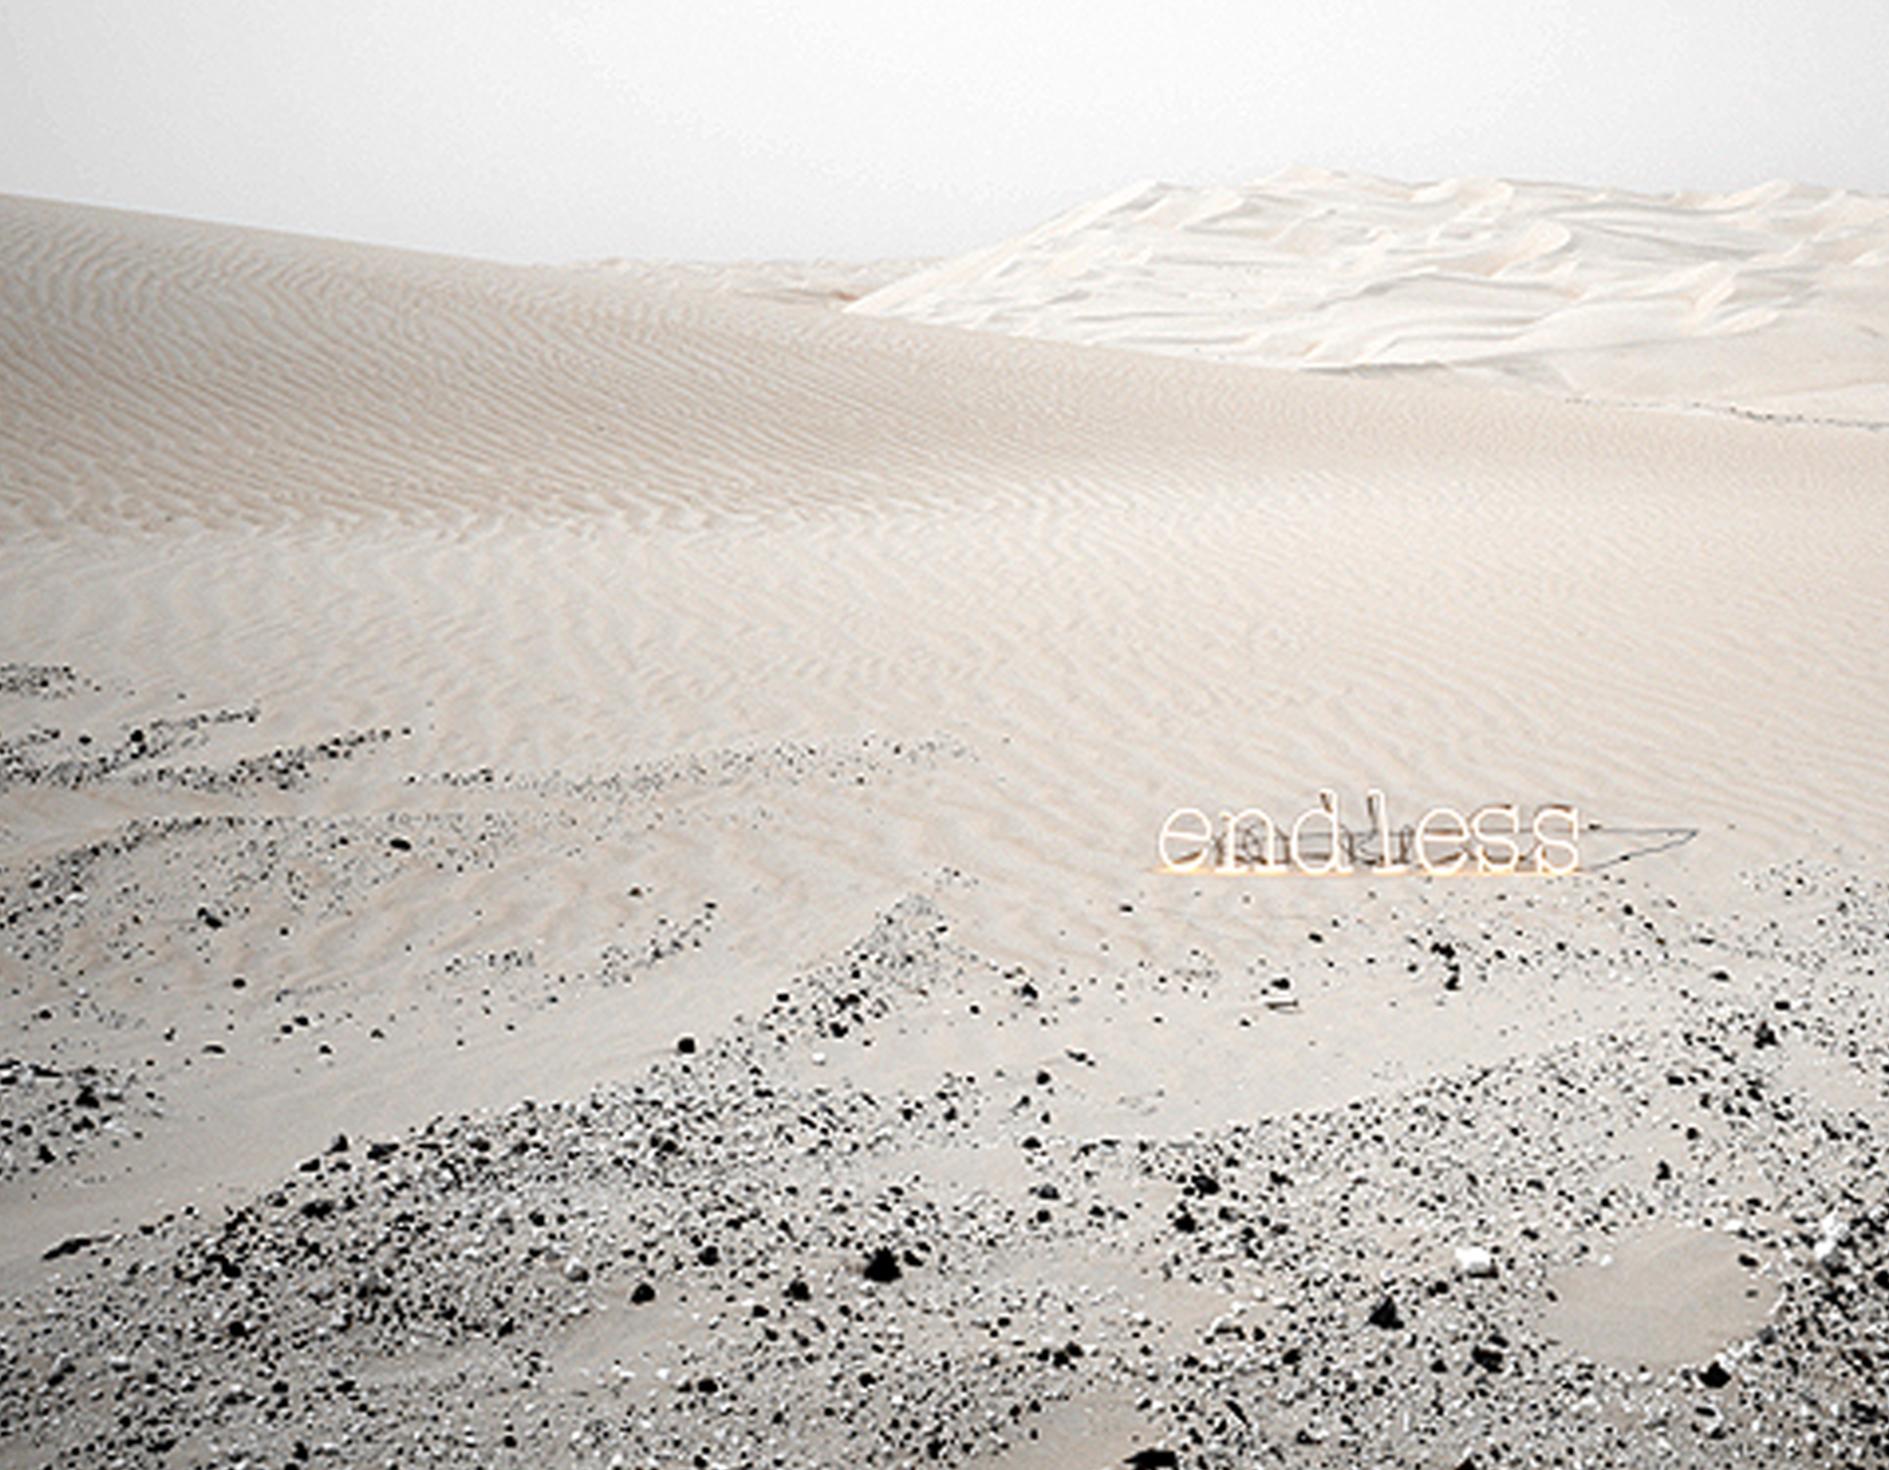 Endless Desert Stone, The Dream Art Project - Photograph by Anne Valverde